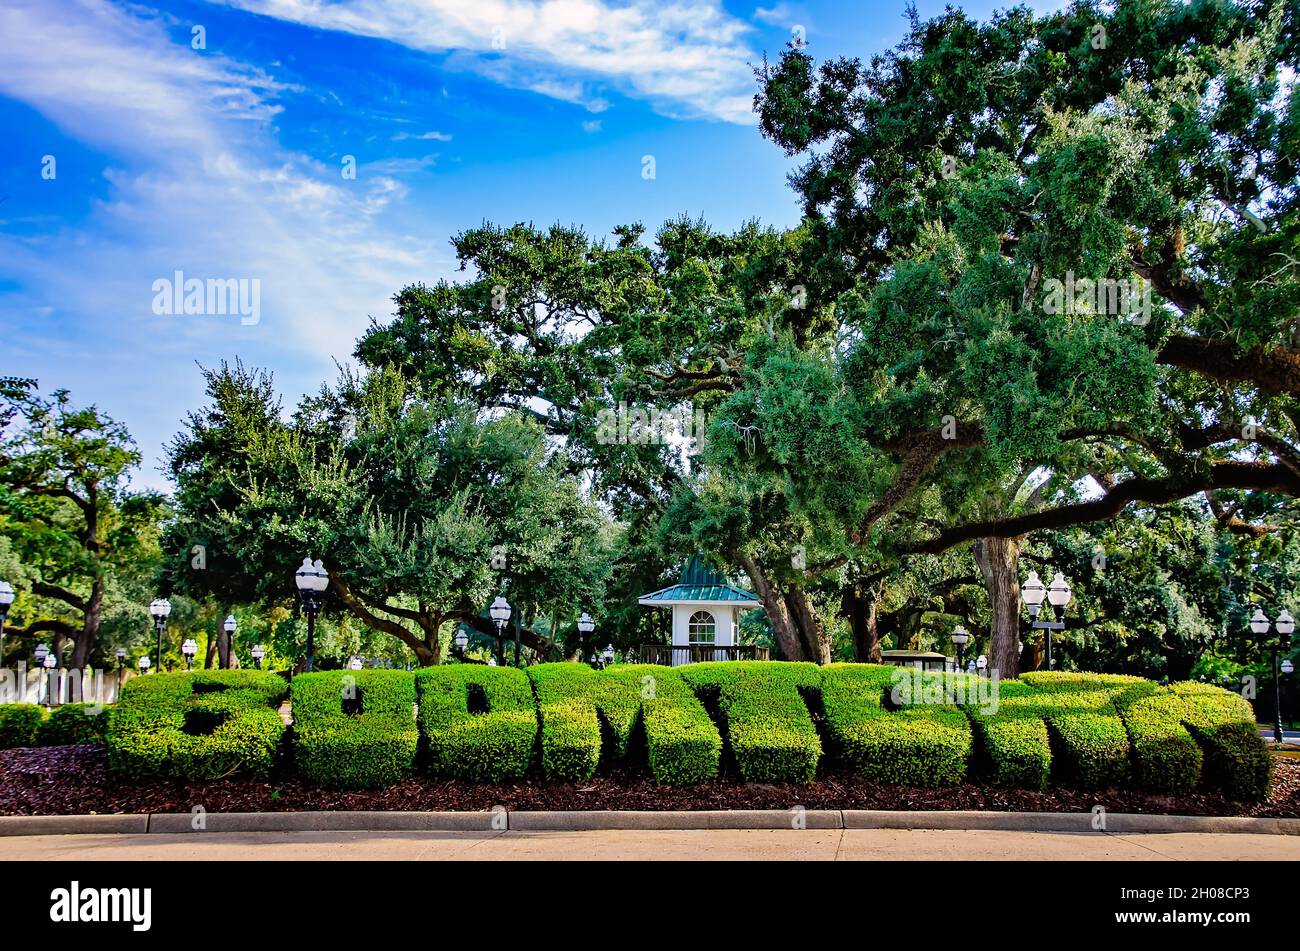 Hedges are pruned to spell out the word, “Boomtown” at Boomtown Casino, Oct. 9, 2021, in Biloxi, Mississippi. Stock Photo